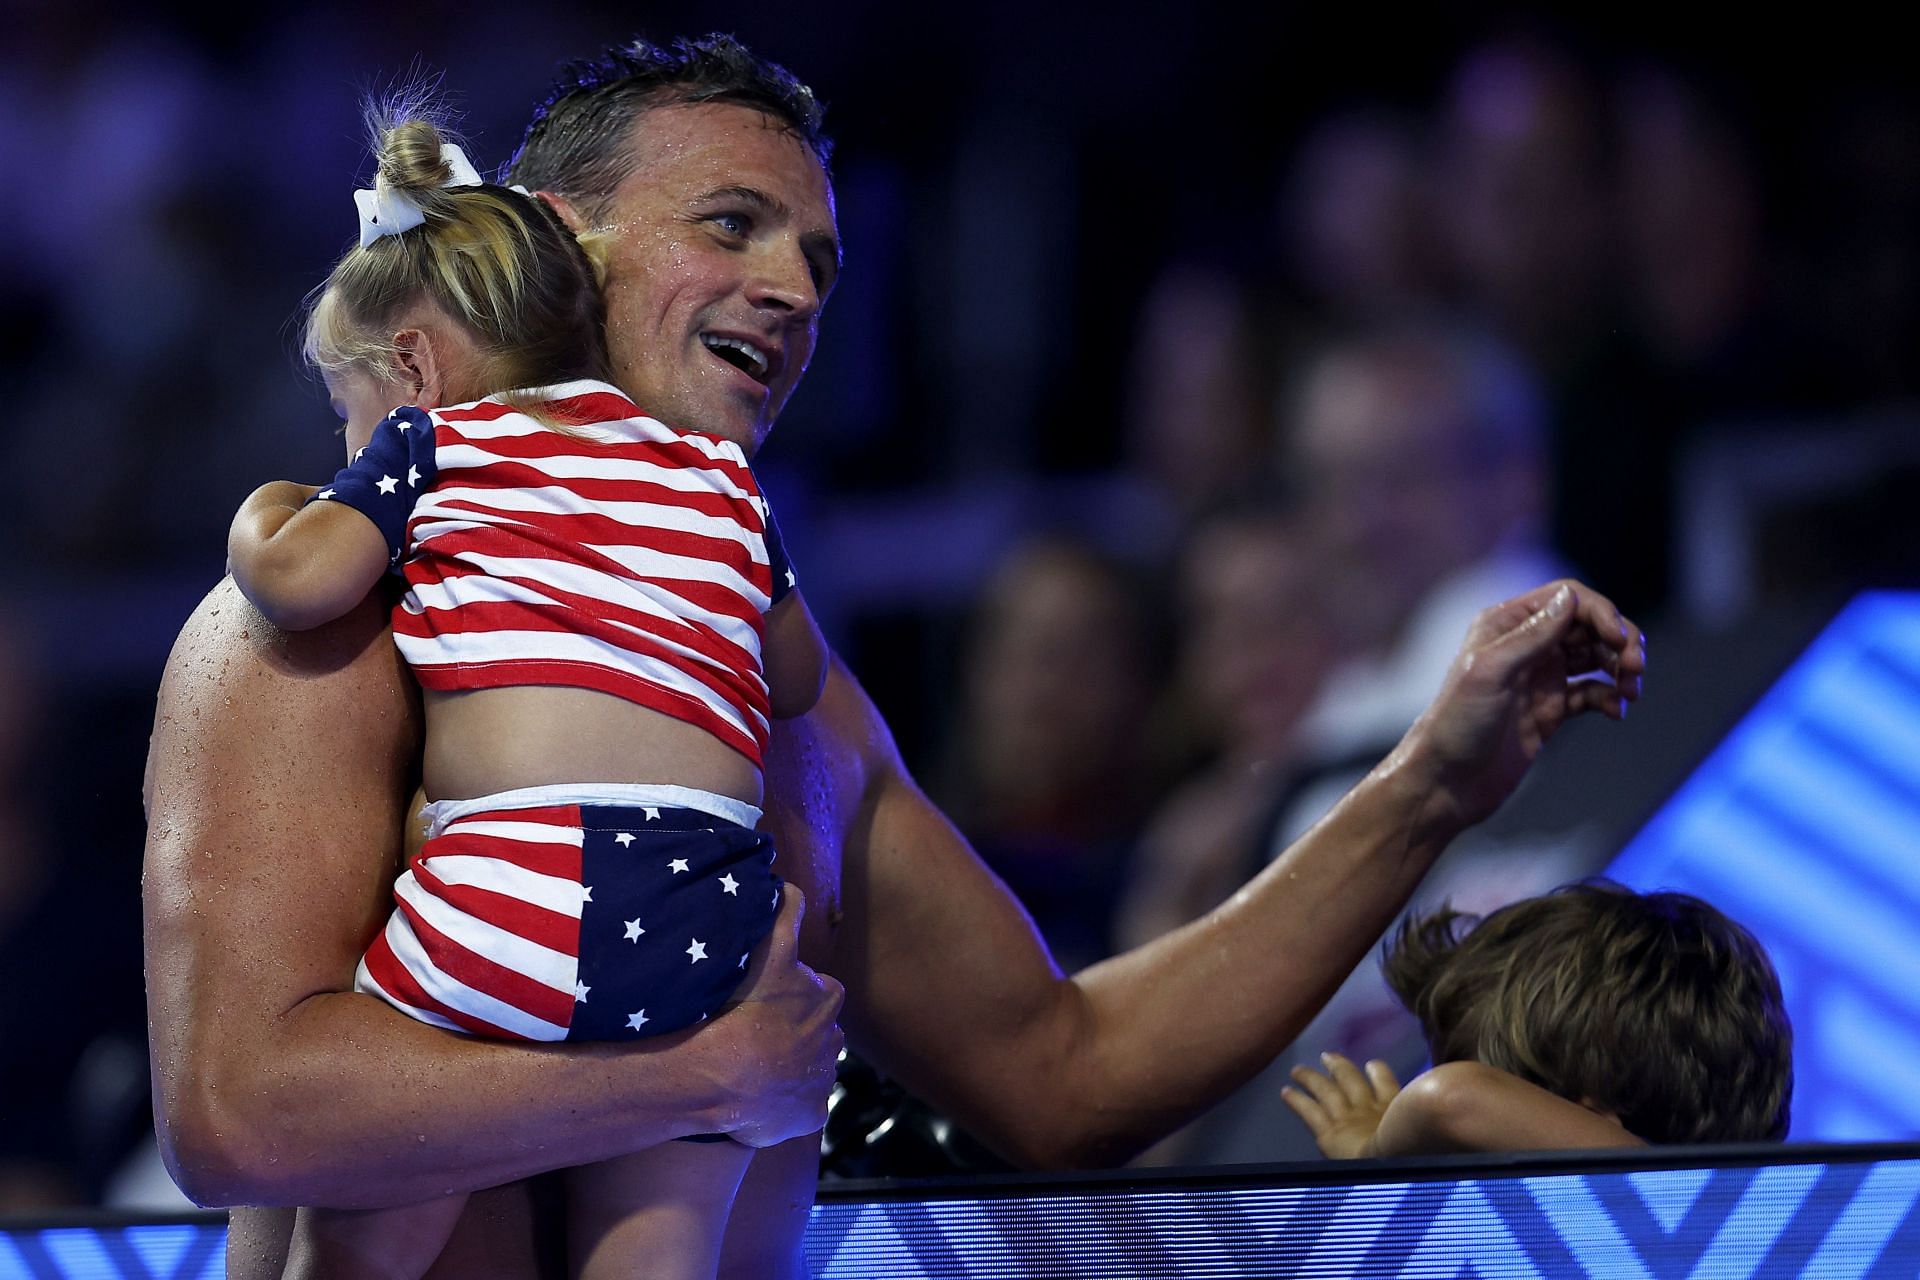 Lochte embraces his kids after the 2021 U.S. Olympic Trials (Photo by Maddie Meyer/Getty Images)